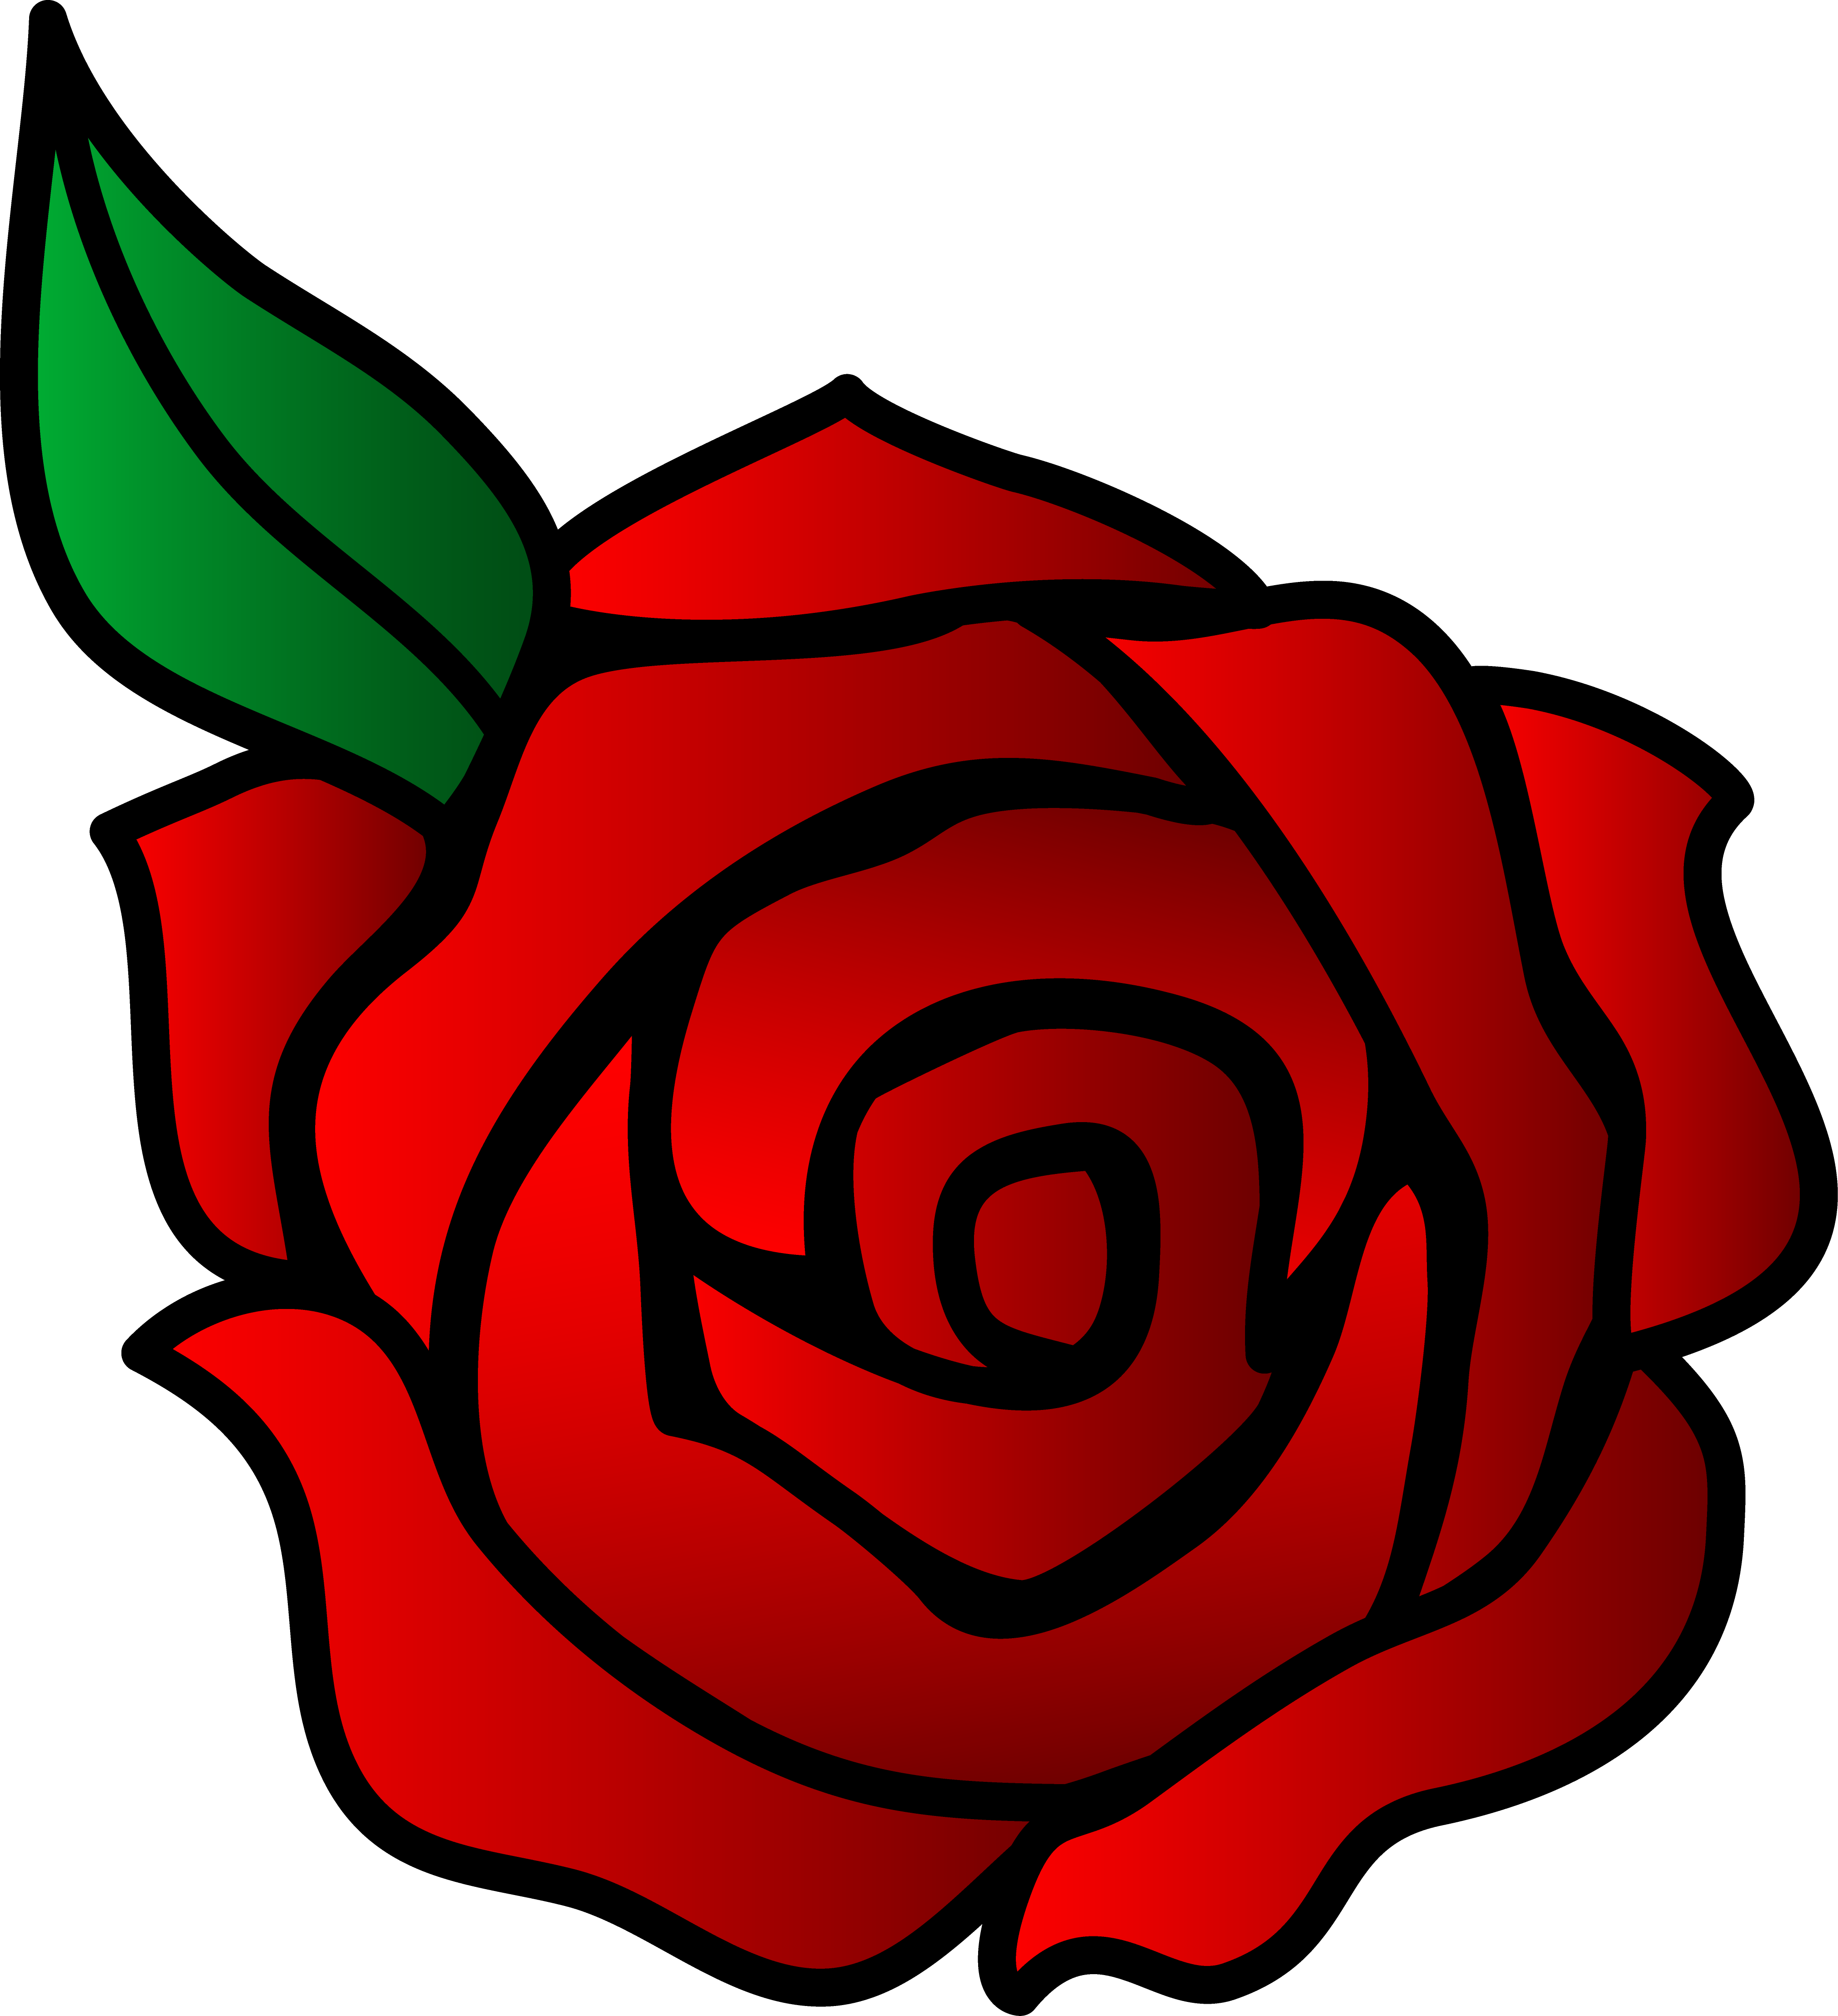 Rose cartoon drawing free download clip art on png